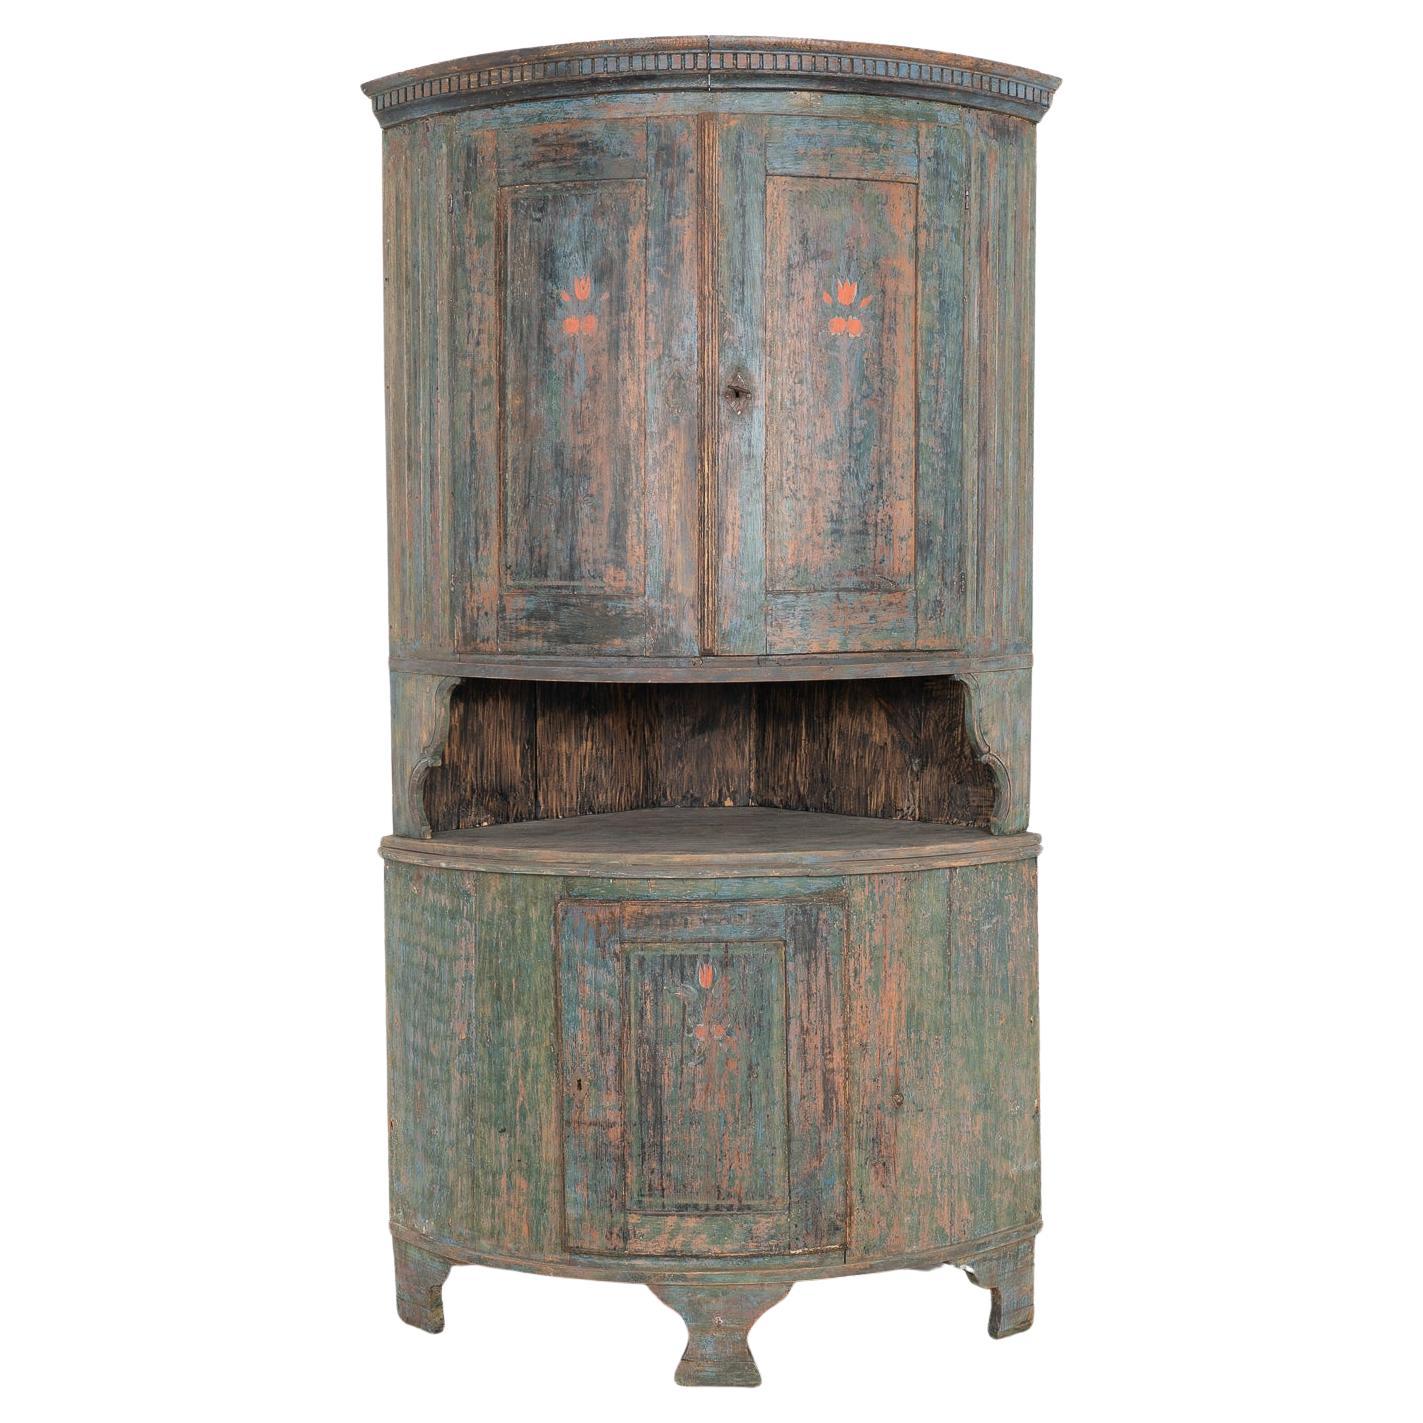 Tall Bow Front Original Painted Pine Corner Cabinet, Sweden circa 1800-20 For Sale